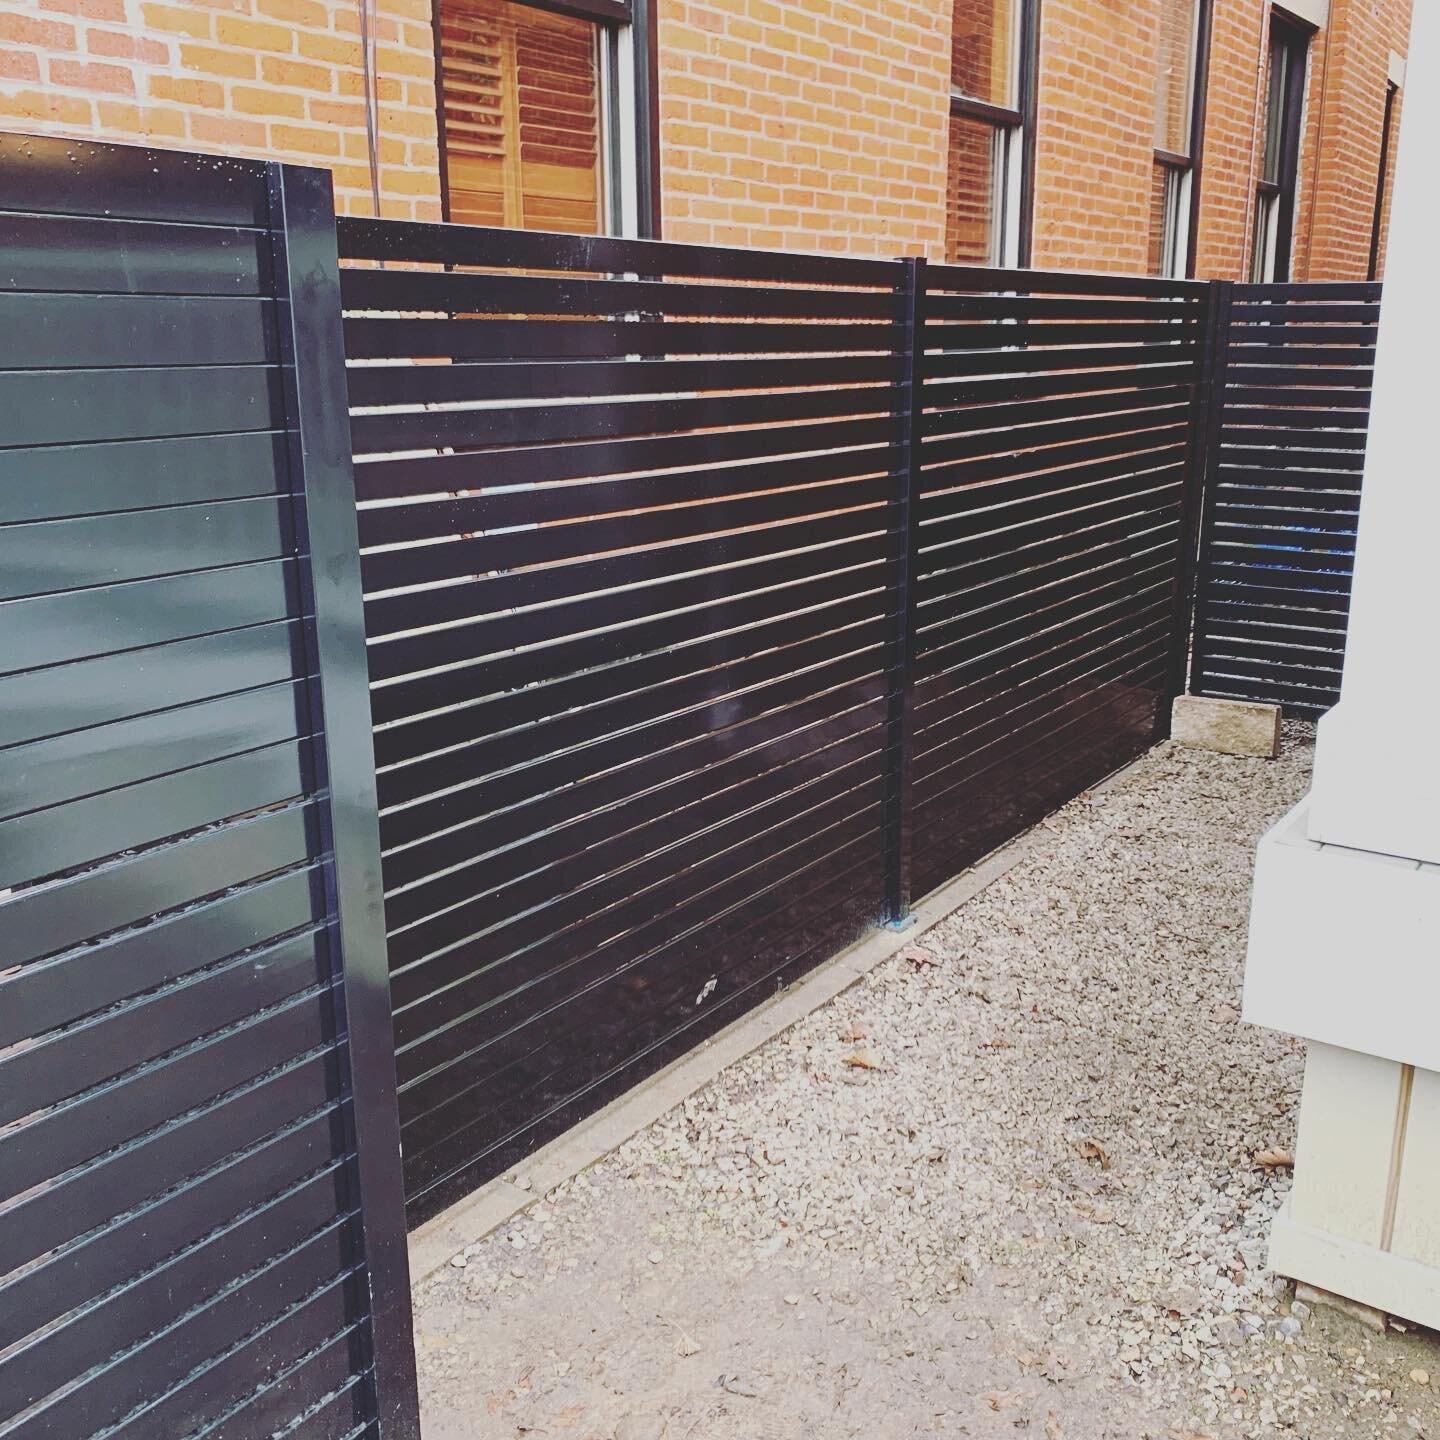 We&rsquo;re making the most of this &ldquo;warmer&rdquo; weather and building with new materials. #aluminumfence #shortnorthartsdistrict